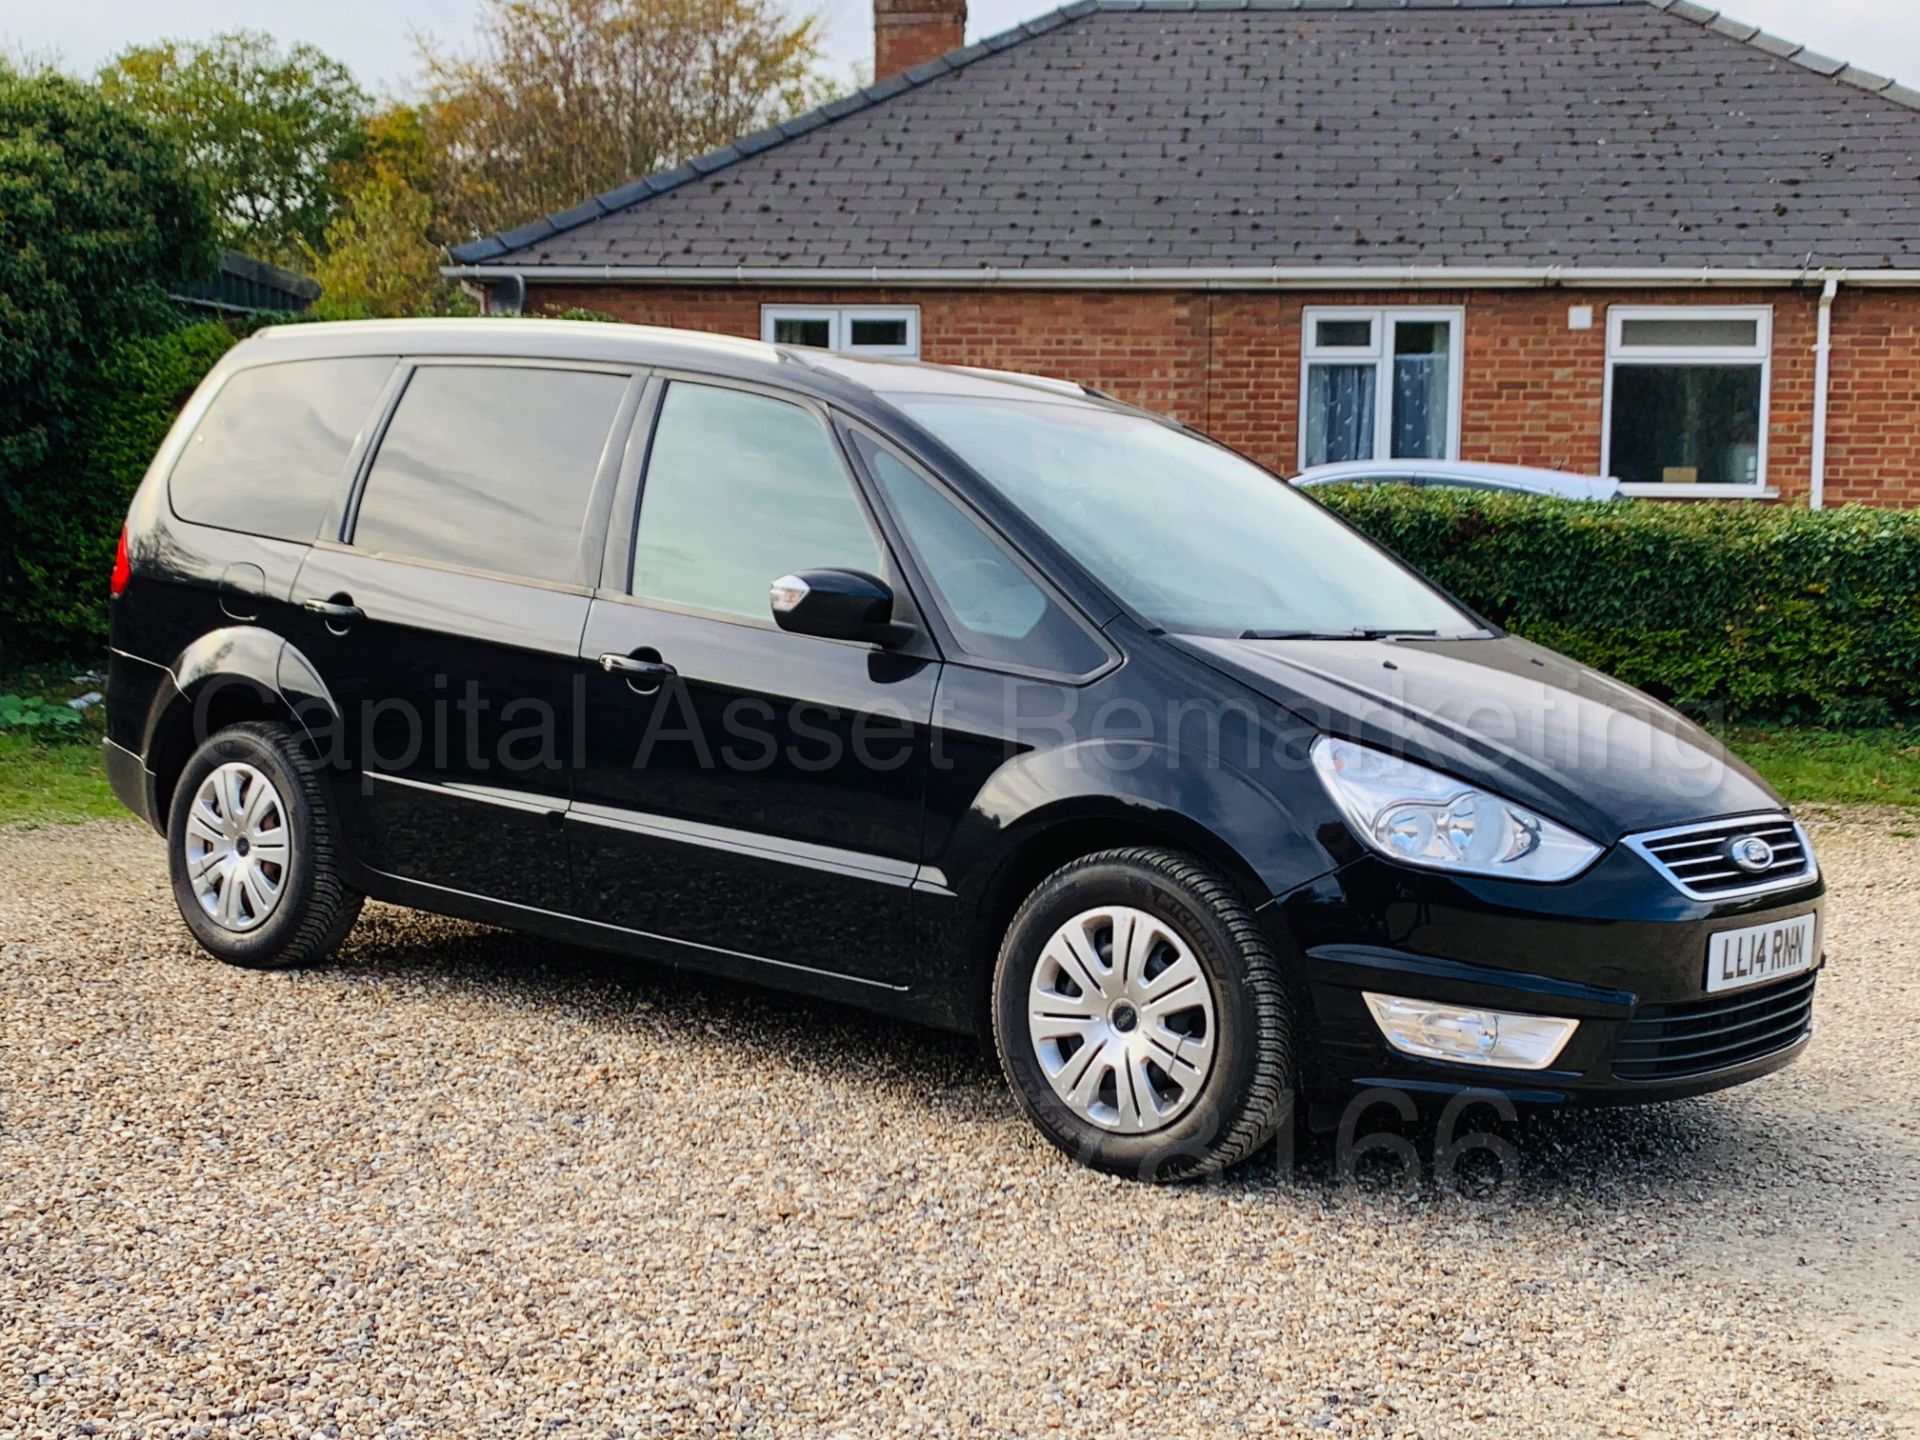 (ON SALE) FORD GALAXY **ZETEC** 7 SEATER MPV (2014) 2.0 TDCI - 140 BHP - AUTO POWER SHIFT (1 OWNER)